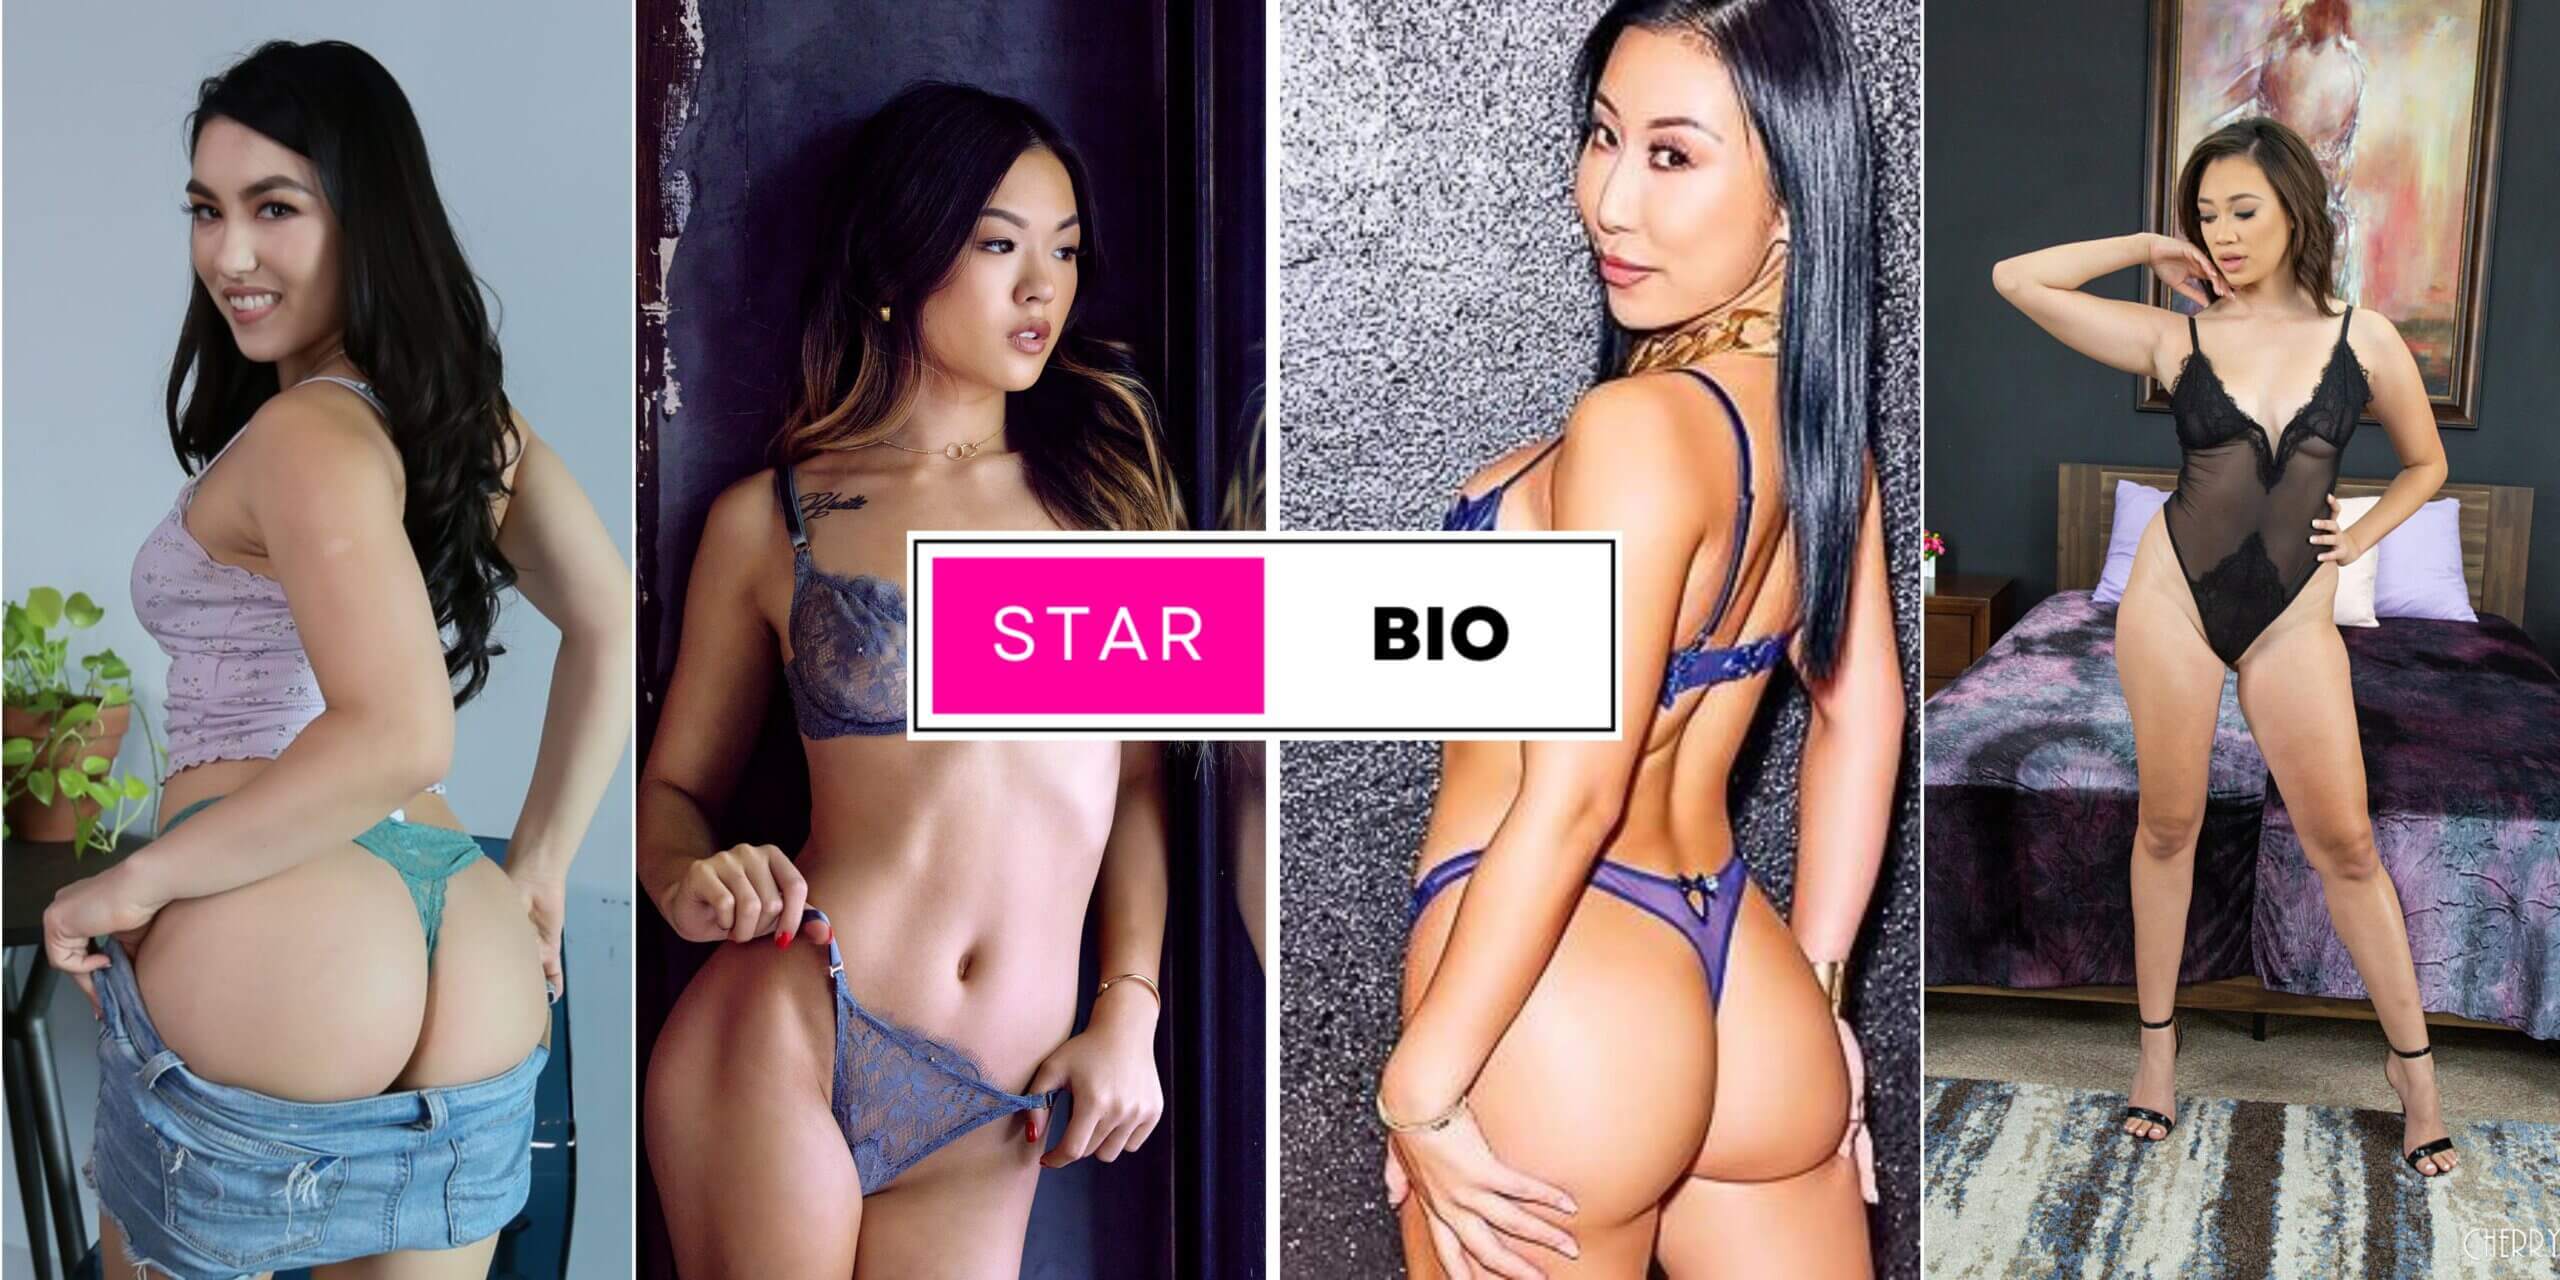 Recent Asian Porn Stars - Top 10 New Asian Pornstars - With 1080p free Download